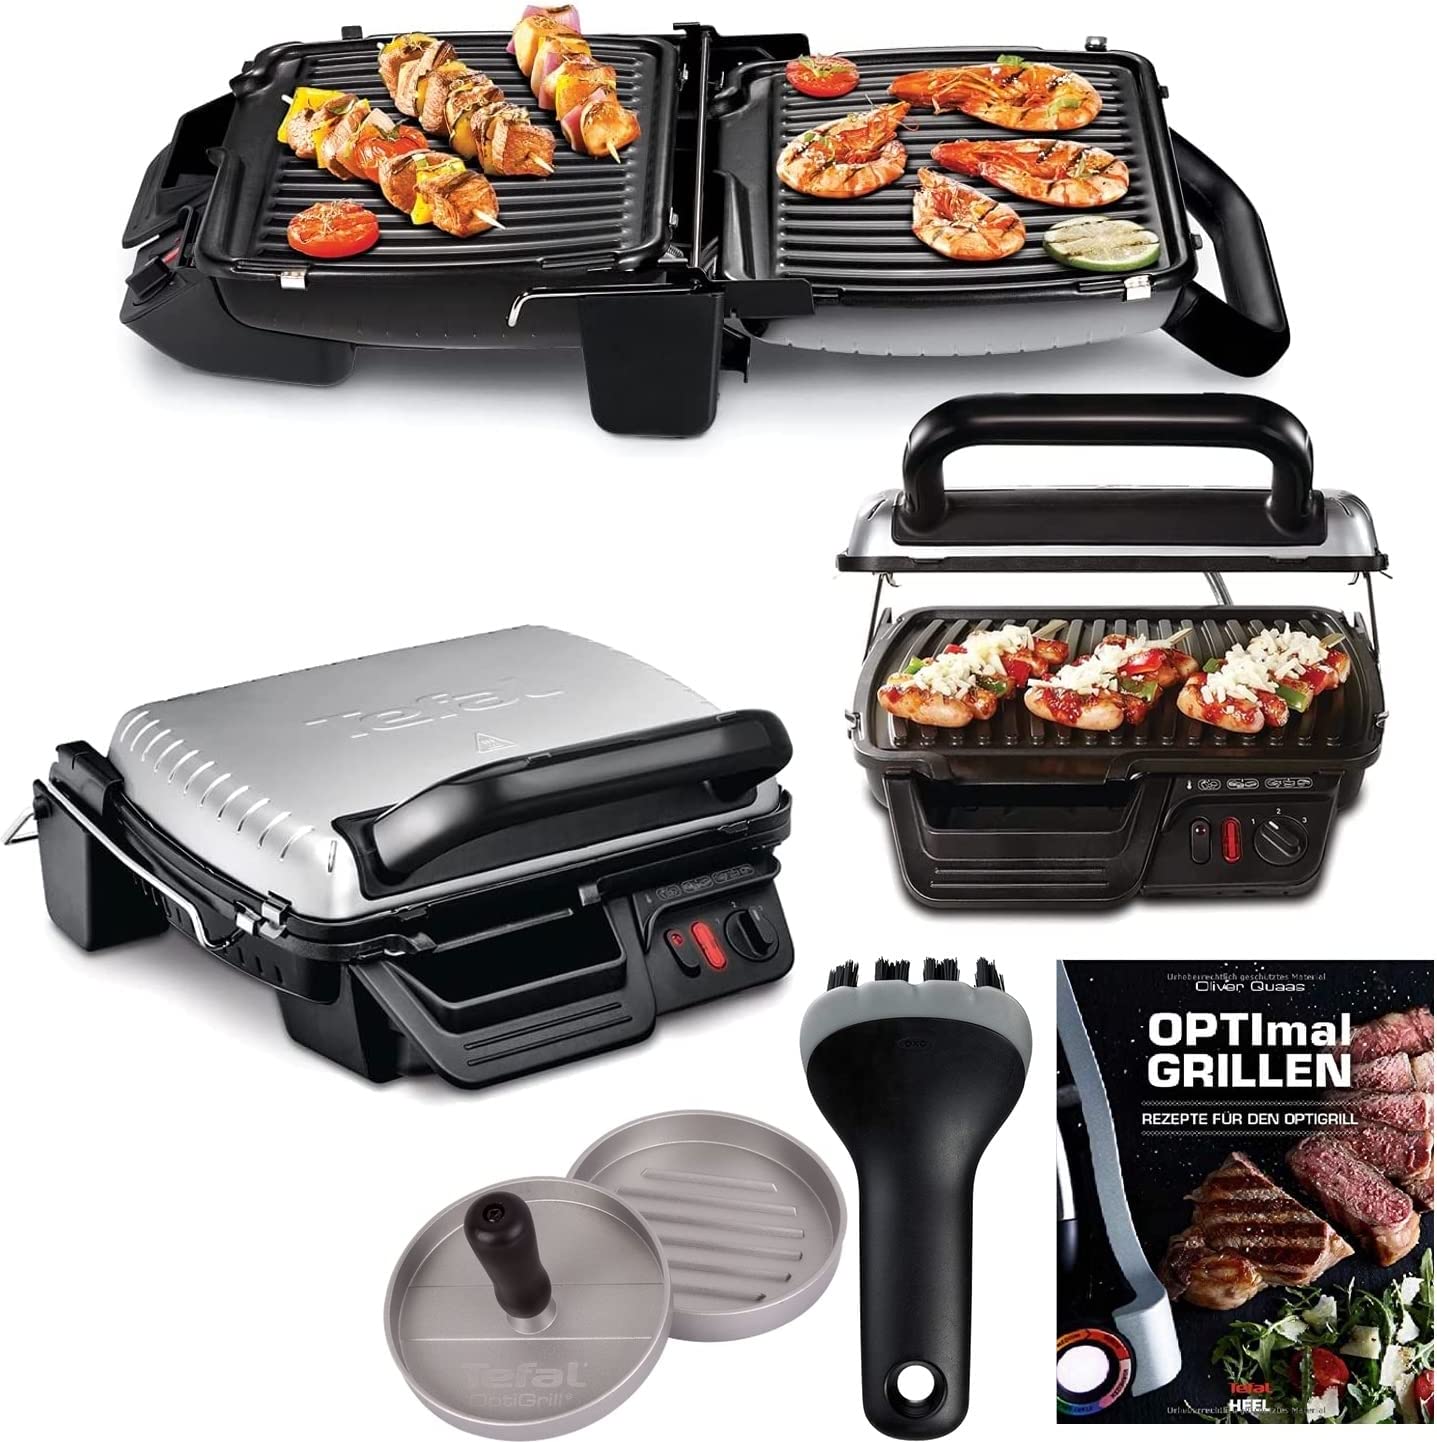 Tefal 3-in-1 Electric Contact Grill, Overbaking Function and Table Grill/BBQ Hinged with Double Grill Surface + Hamburger Press + Good Grips Grill Brush + Recipe Booklet, Non-Stick Grill Plates 2000 W